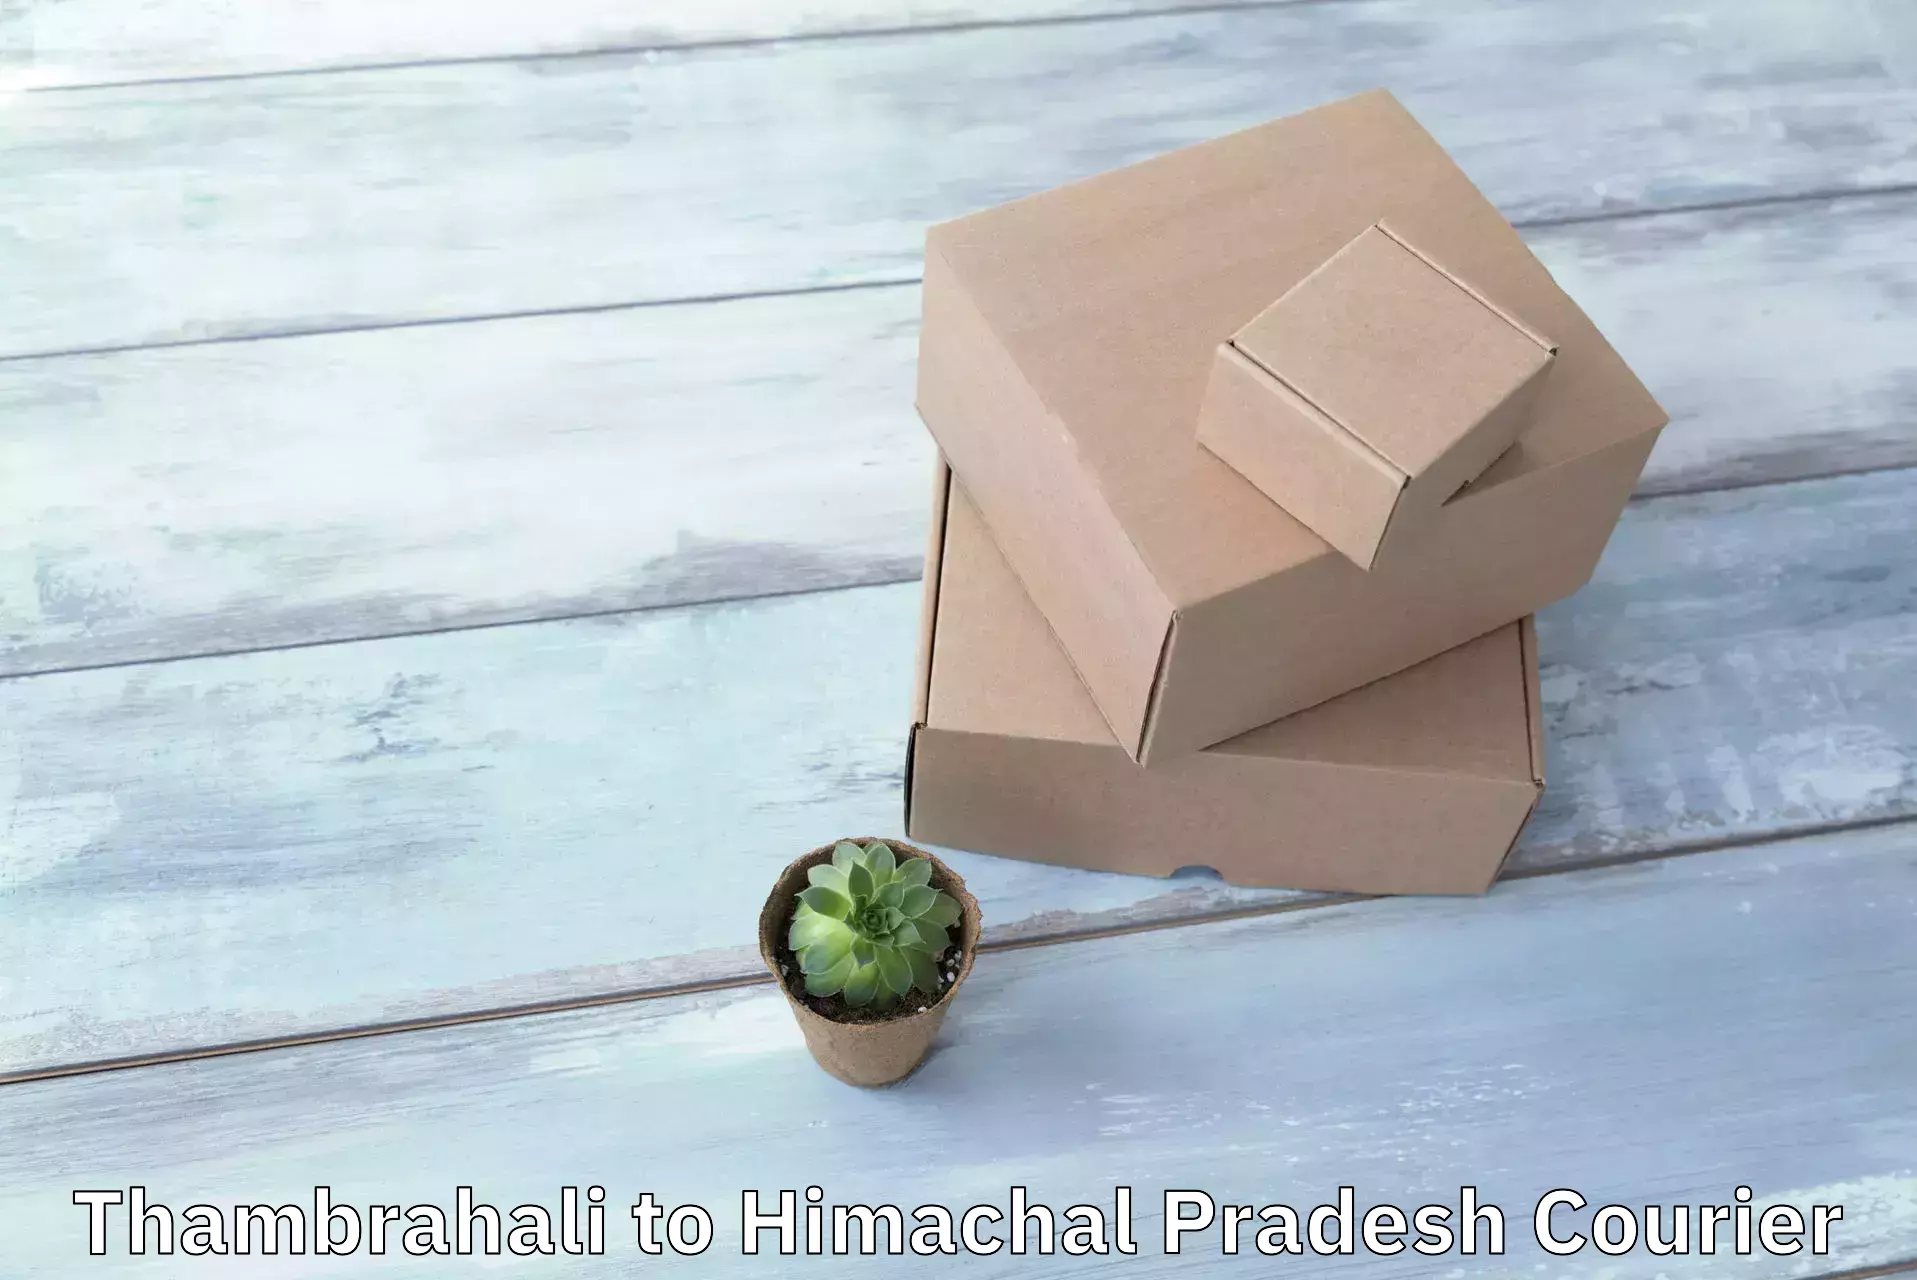 Express delivery solutions Thambrahali to Himachal Pradesh